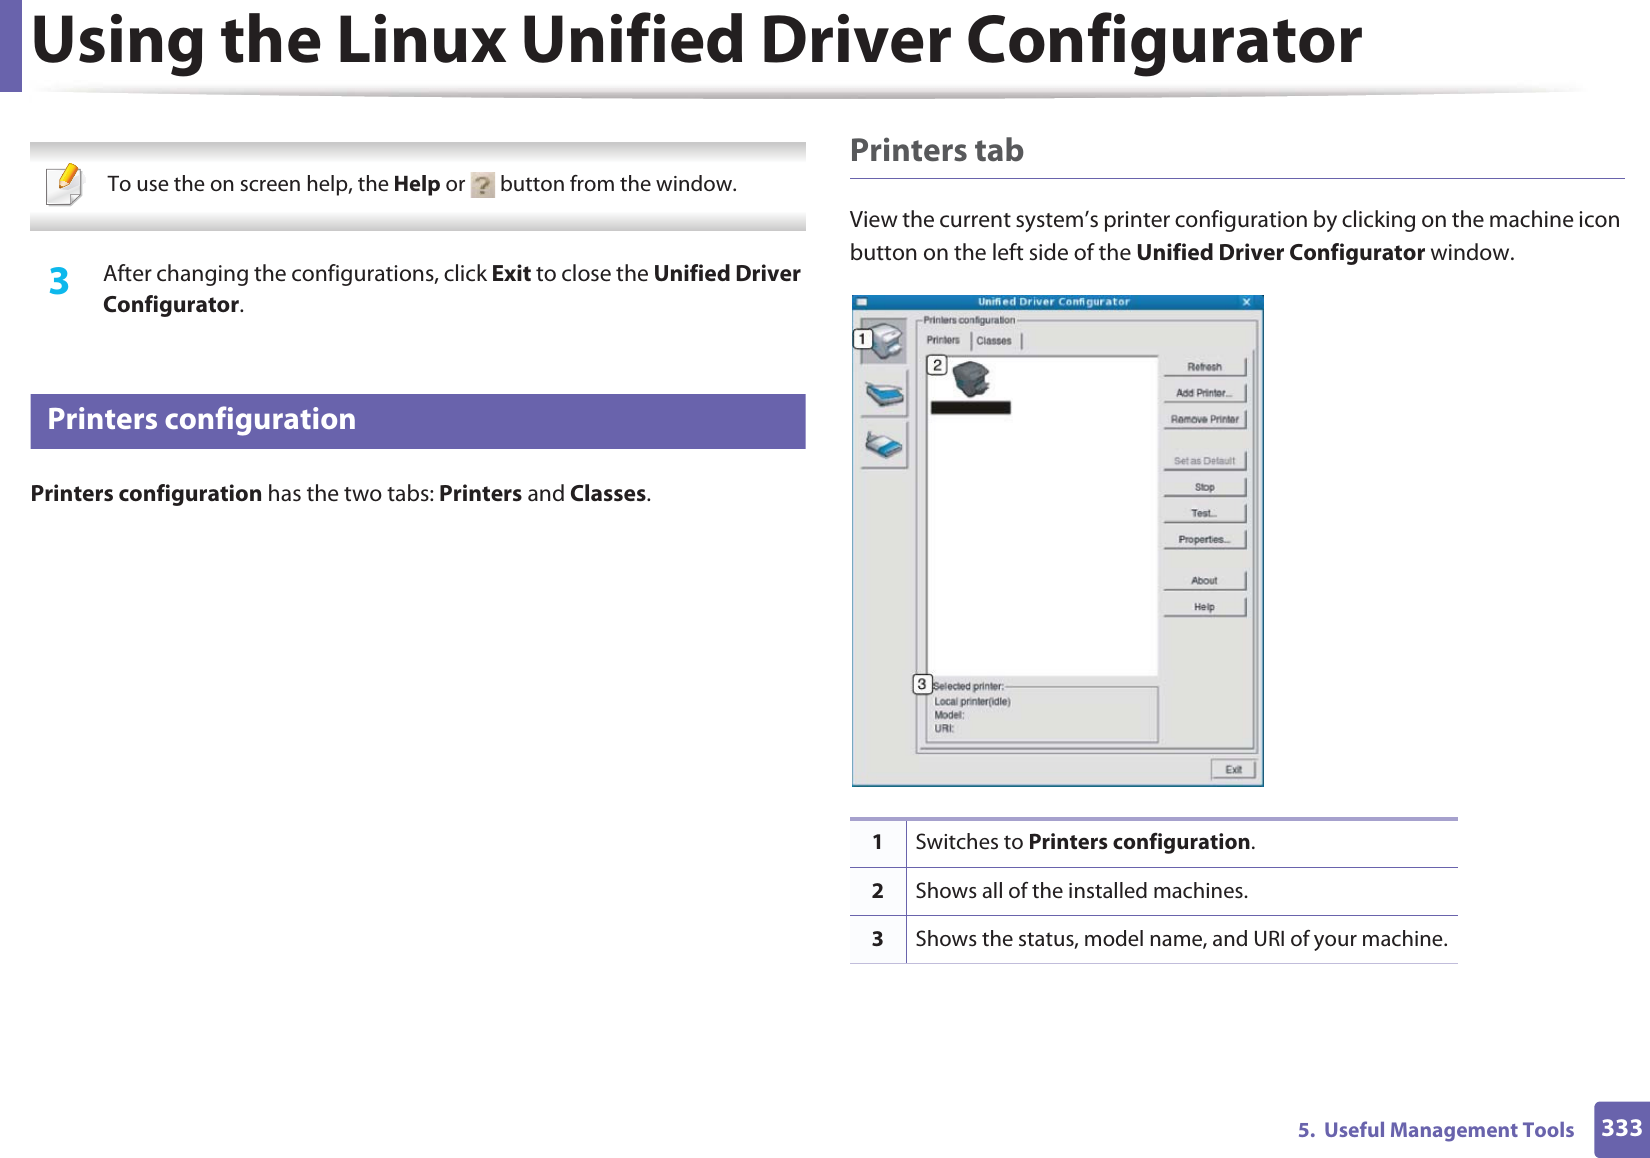 Using the Linux Unified Driver Configurator3335.  Useful Management Tools  To use the on screen help, the Help or   button from the window. 3  After changing the configurations, click Exit to close the Unified Driver Configurator.12 Printers configurationPrinters configuration has the two tabs: Printers and Classes.Printers tabView the current system’s printer configuration by clicking on the machine icon button on the left side of the Unified Driver Configurator window.1Switches to Printers configuration.2Shows all of the installed machines.3Shows the status, model name, and URI of your machine.